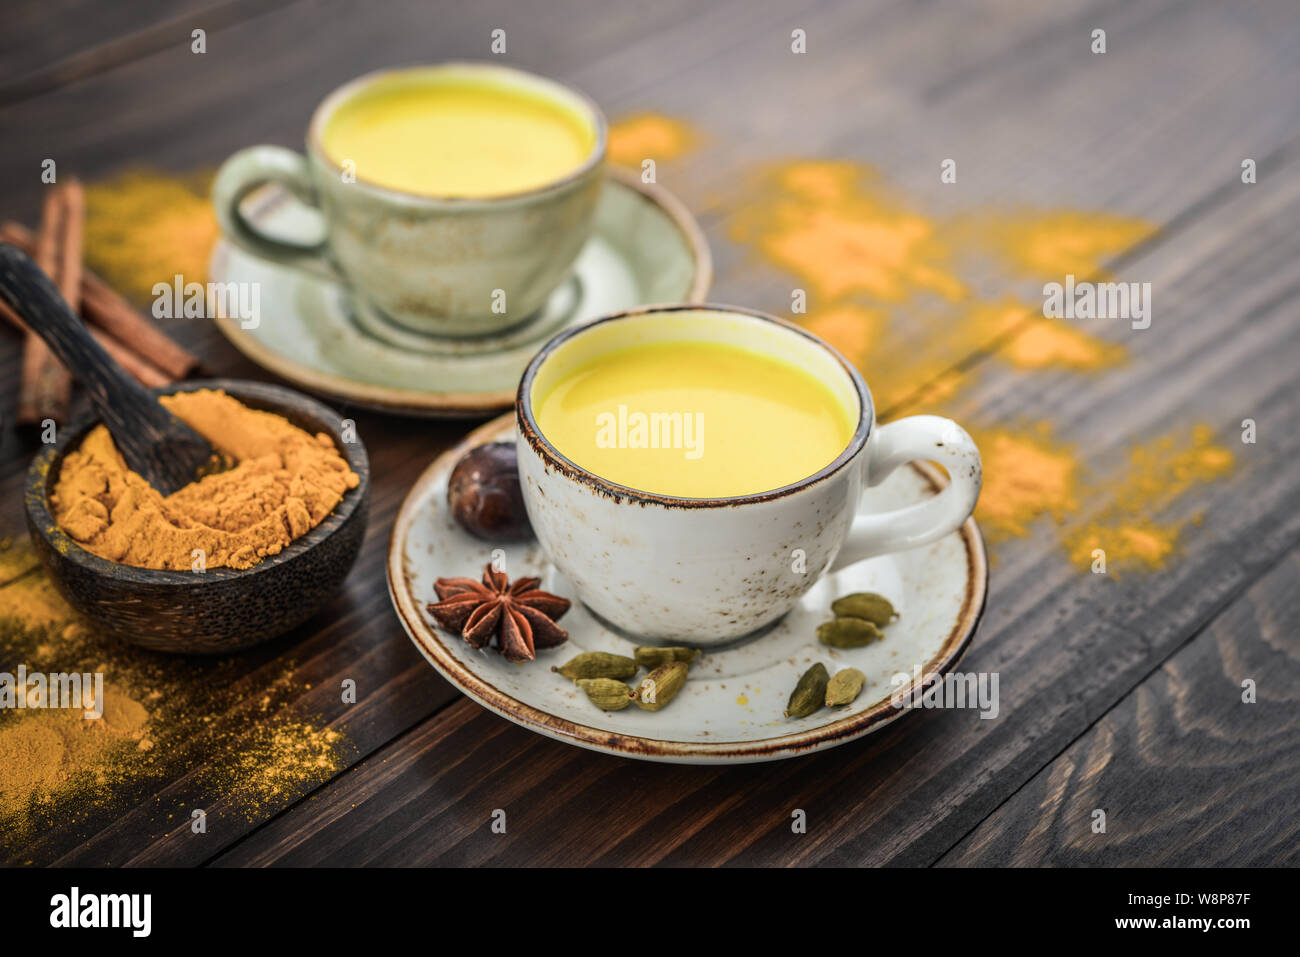 Traditional Indian drink turmeric milk is golden milk with cinnamon, cloves, pepper and turmeric on a wooden background with spices Stock Photo